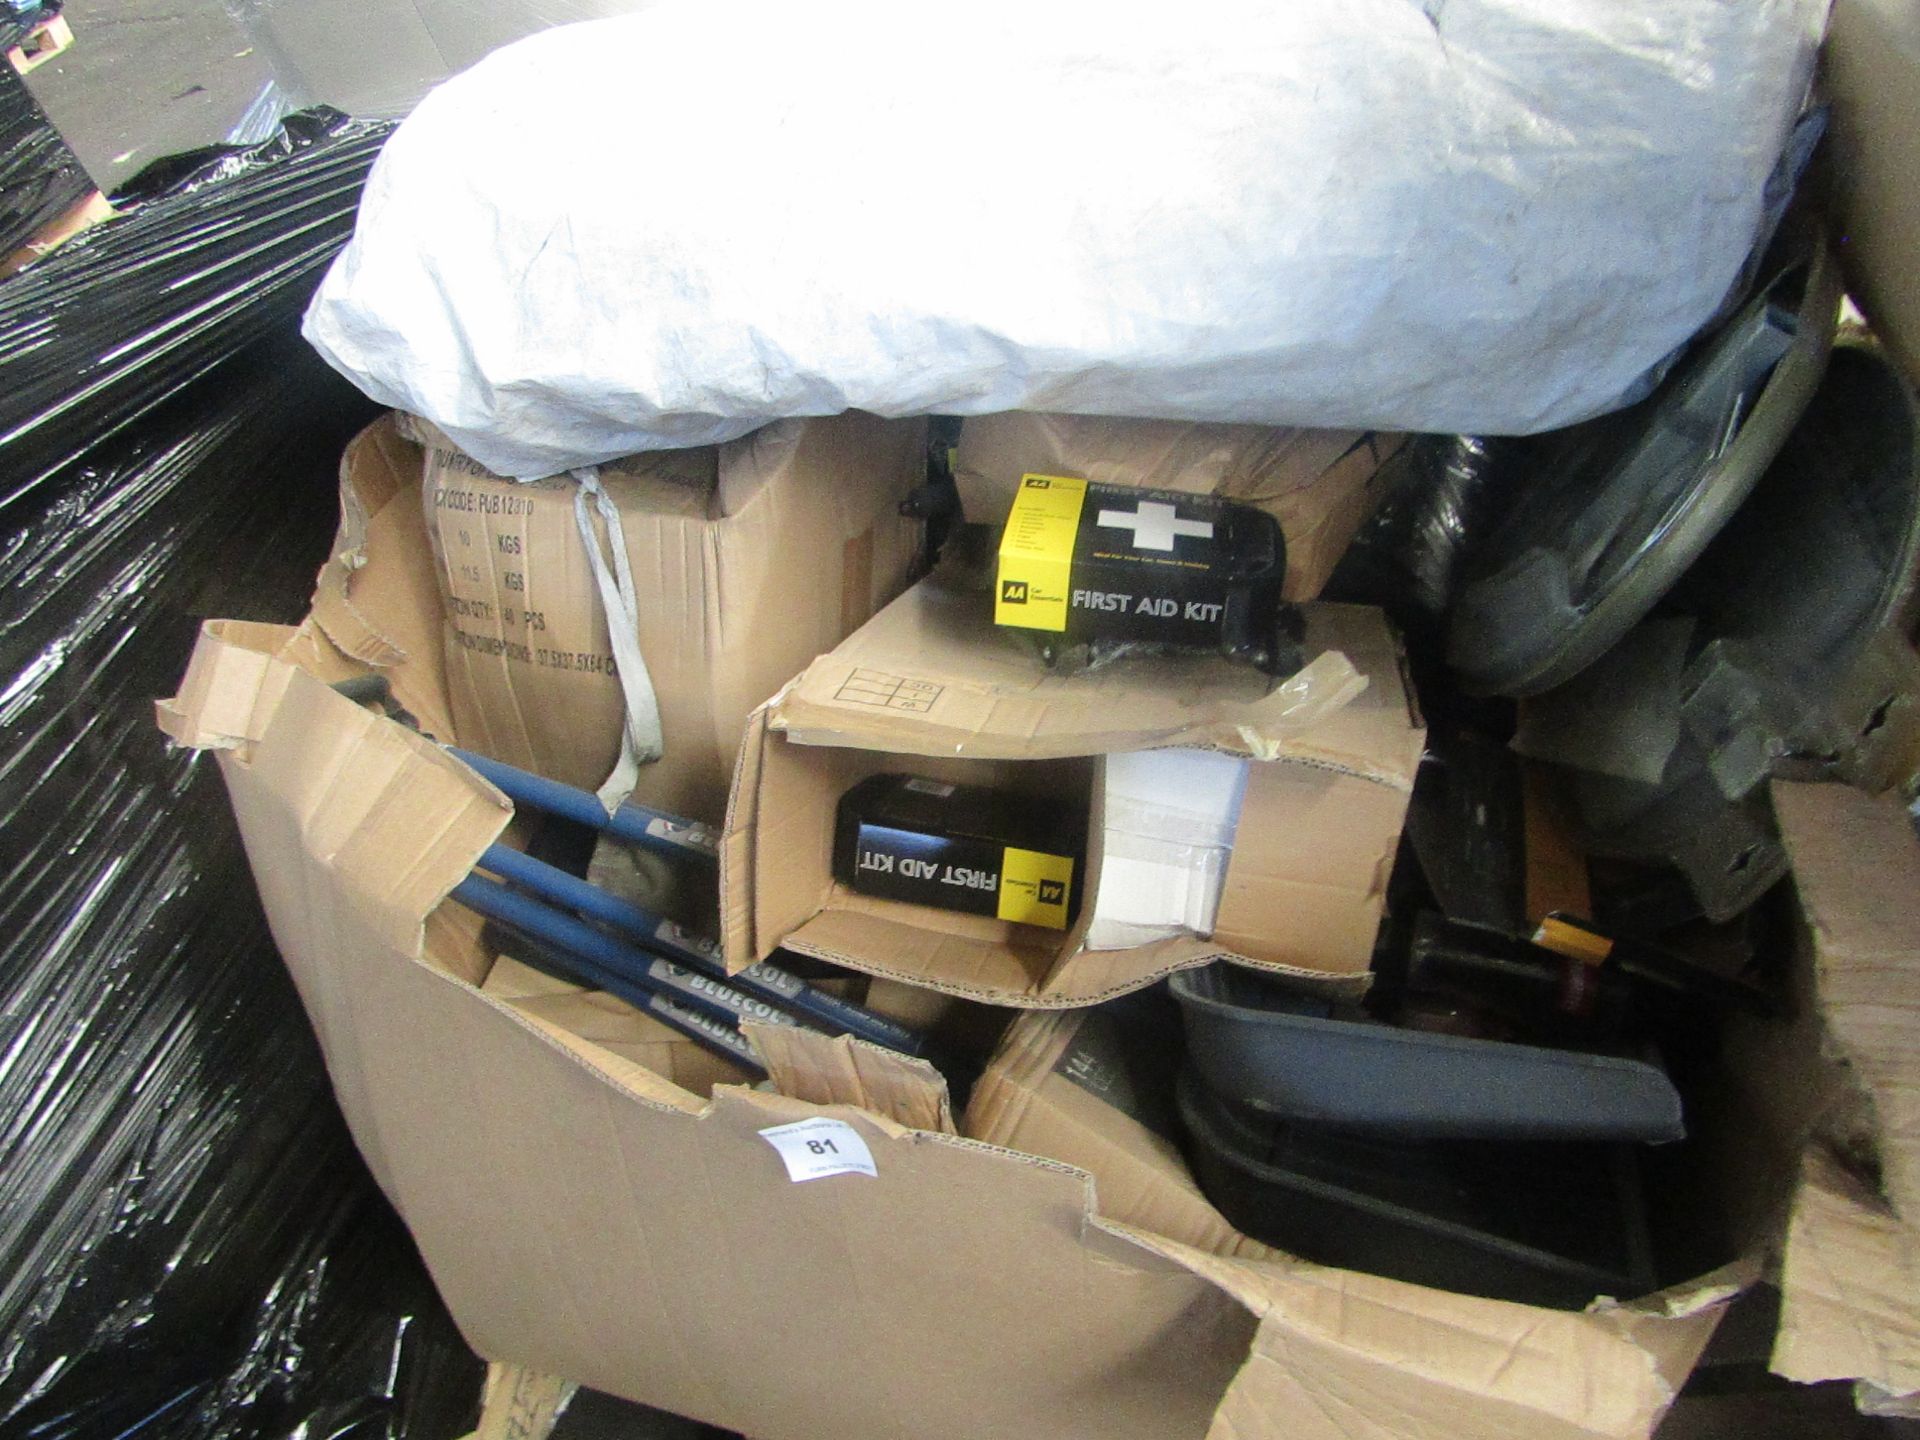 PALLET CONTAINING CAR ACCESSORIES, SNOW SHOVELS AND TRAVEL FIRST AID KITS. ALL UNCHECKED